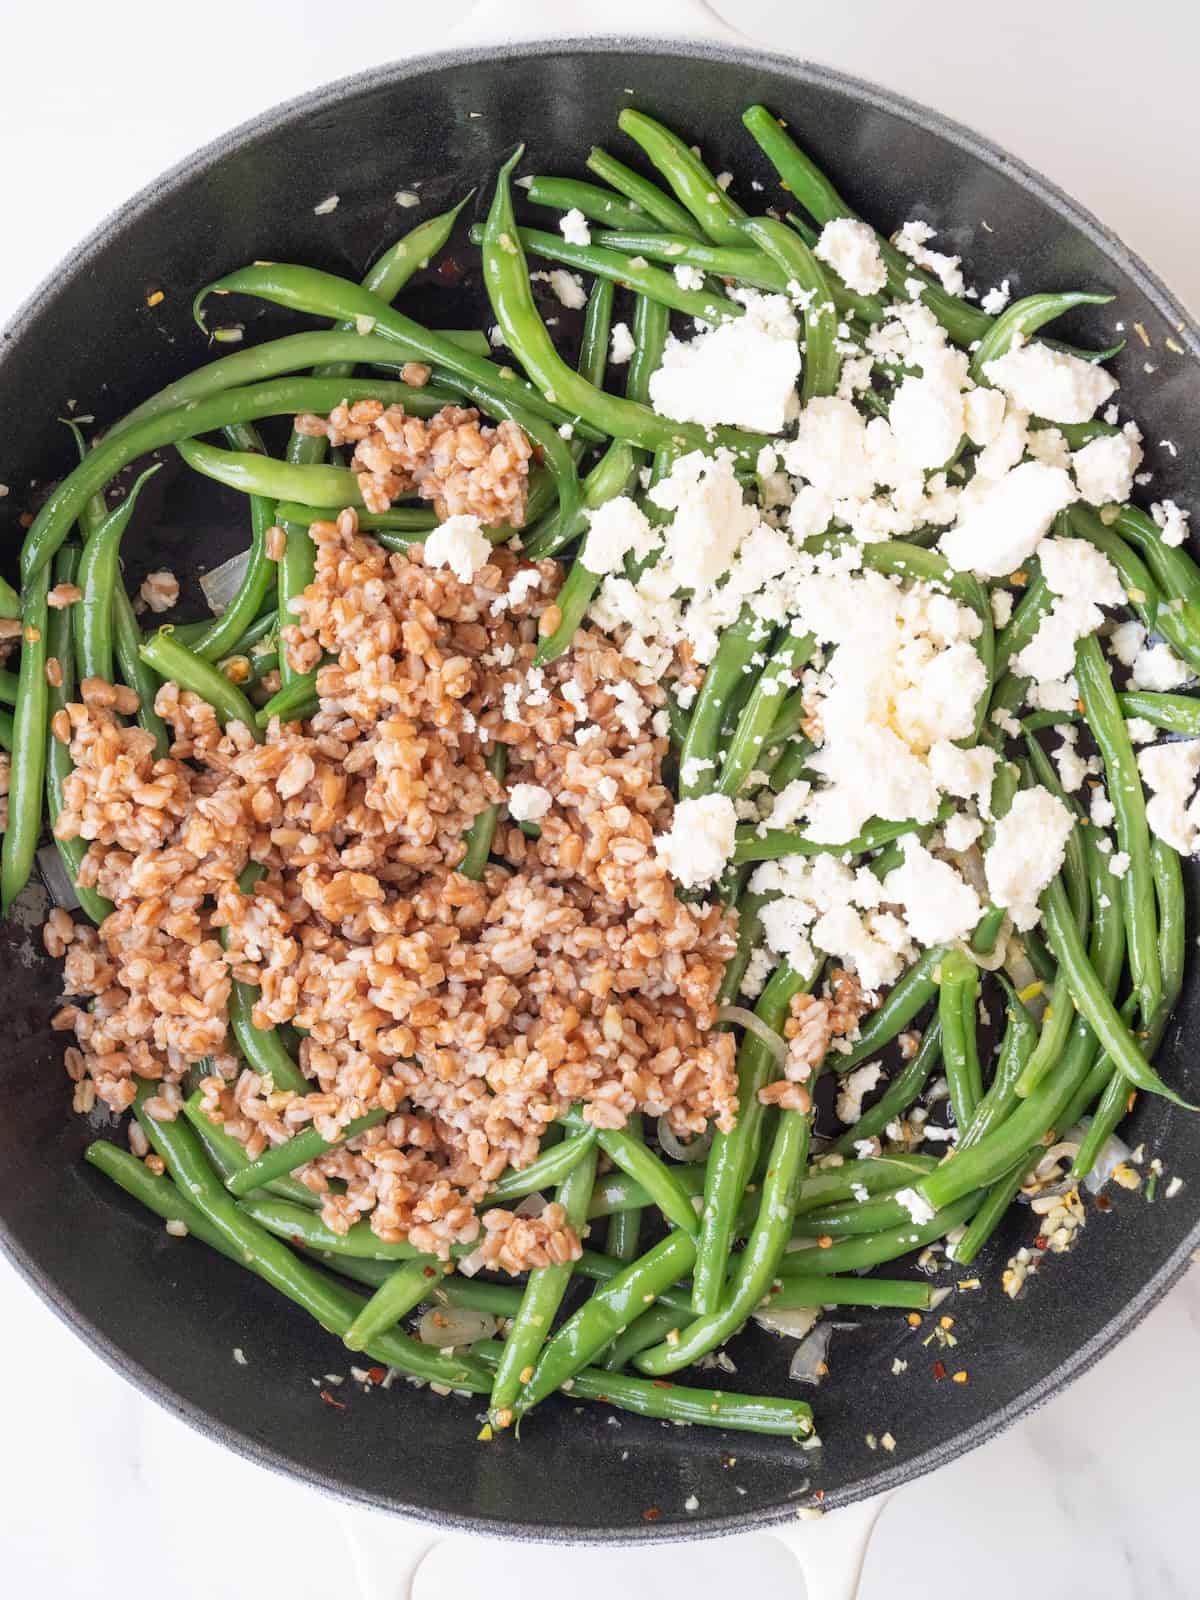 A skillet with green beans being booked, and cooked farro and crumbled feta just added. 